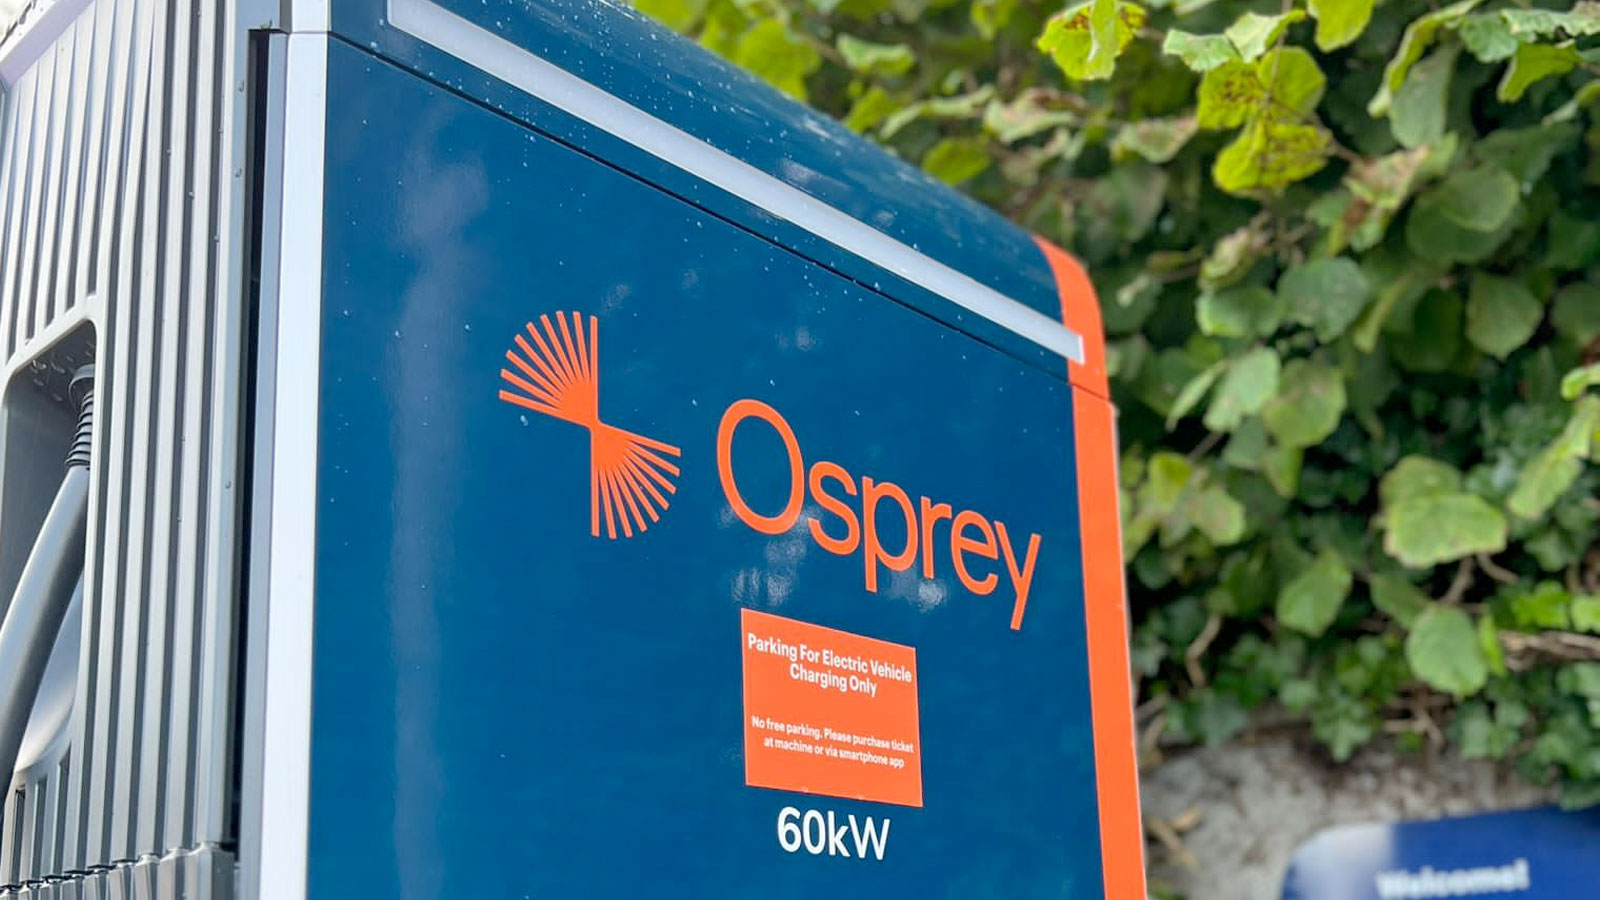 Osprey Charging opts for Wallbox Supernova to expand its DC charging network